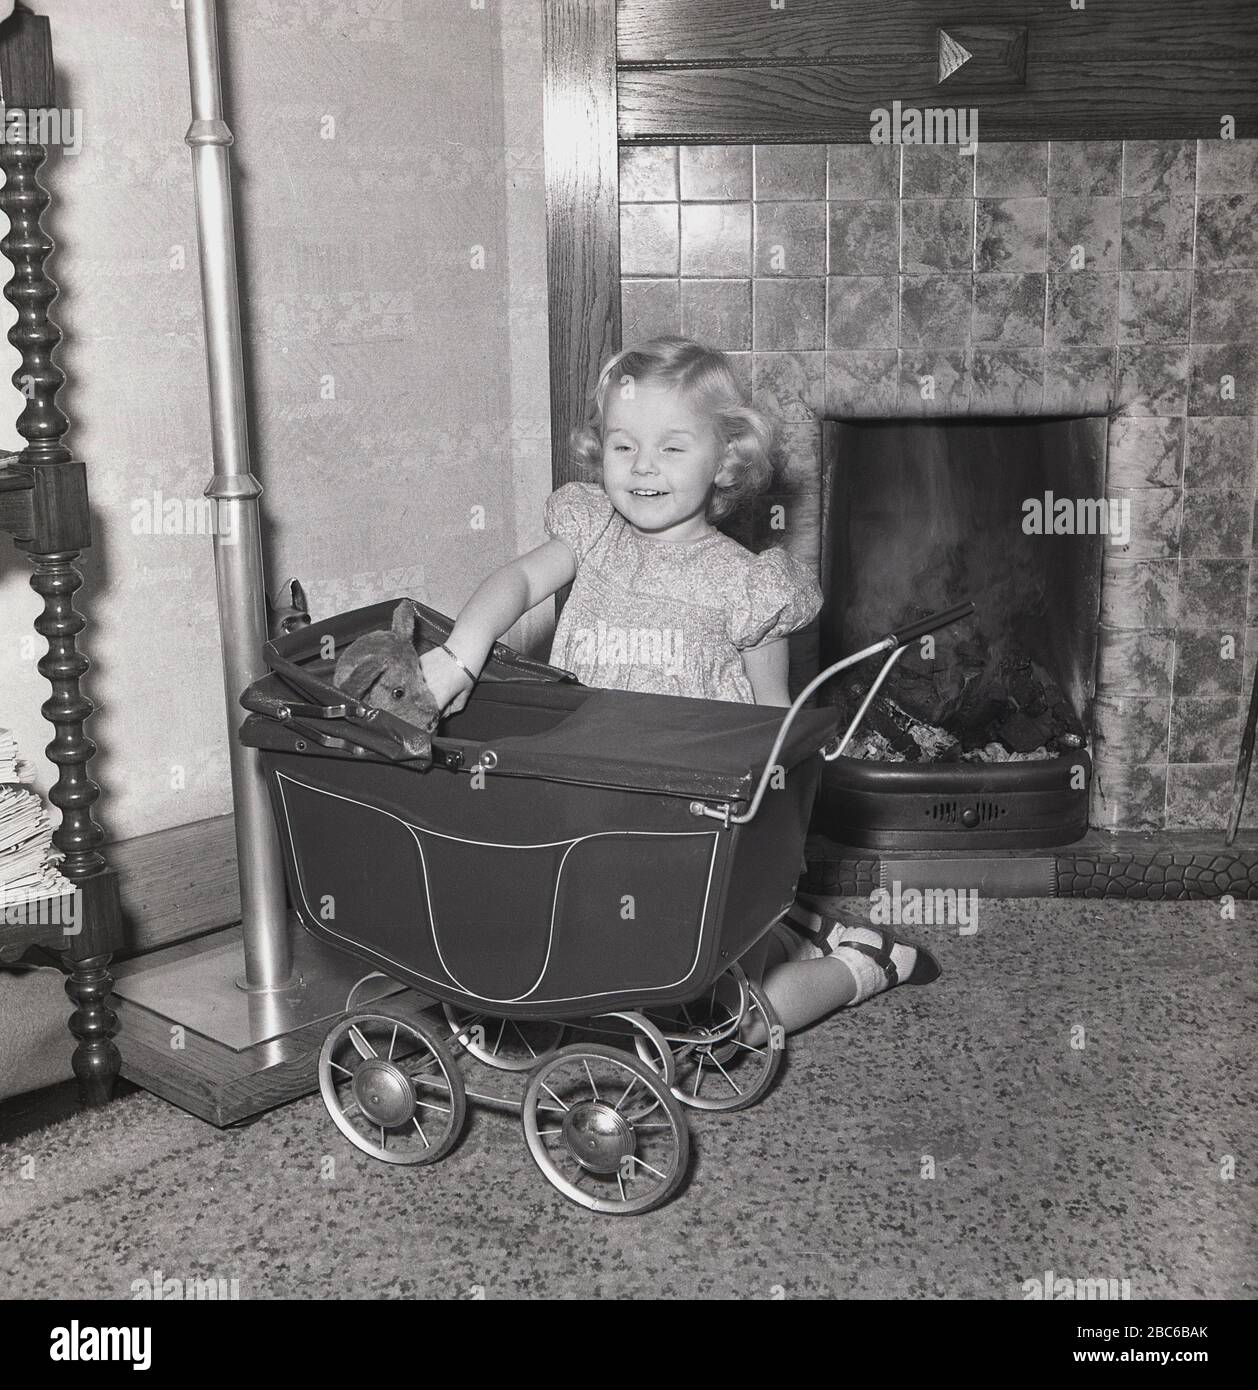 1950s, in a living room, in front of an open coal fire, a young girl playing with her soft toy sat in a small four-wheeled doll's pram of the era, England, UK. Stock Photo